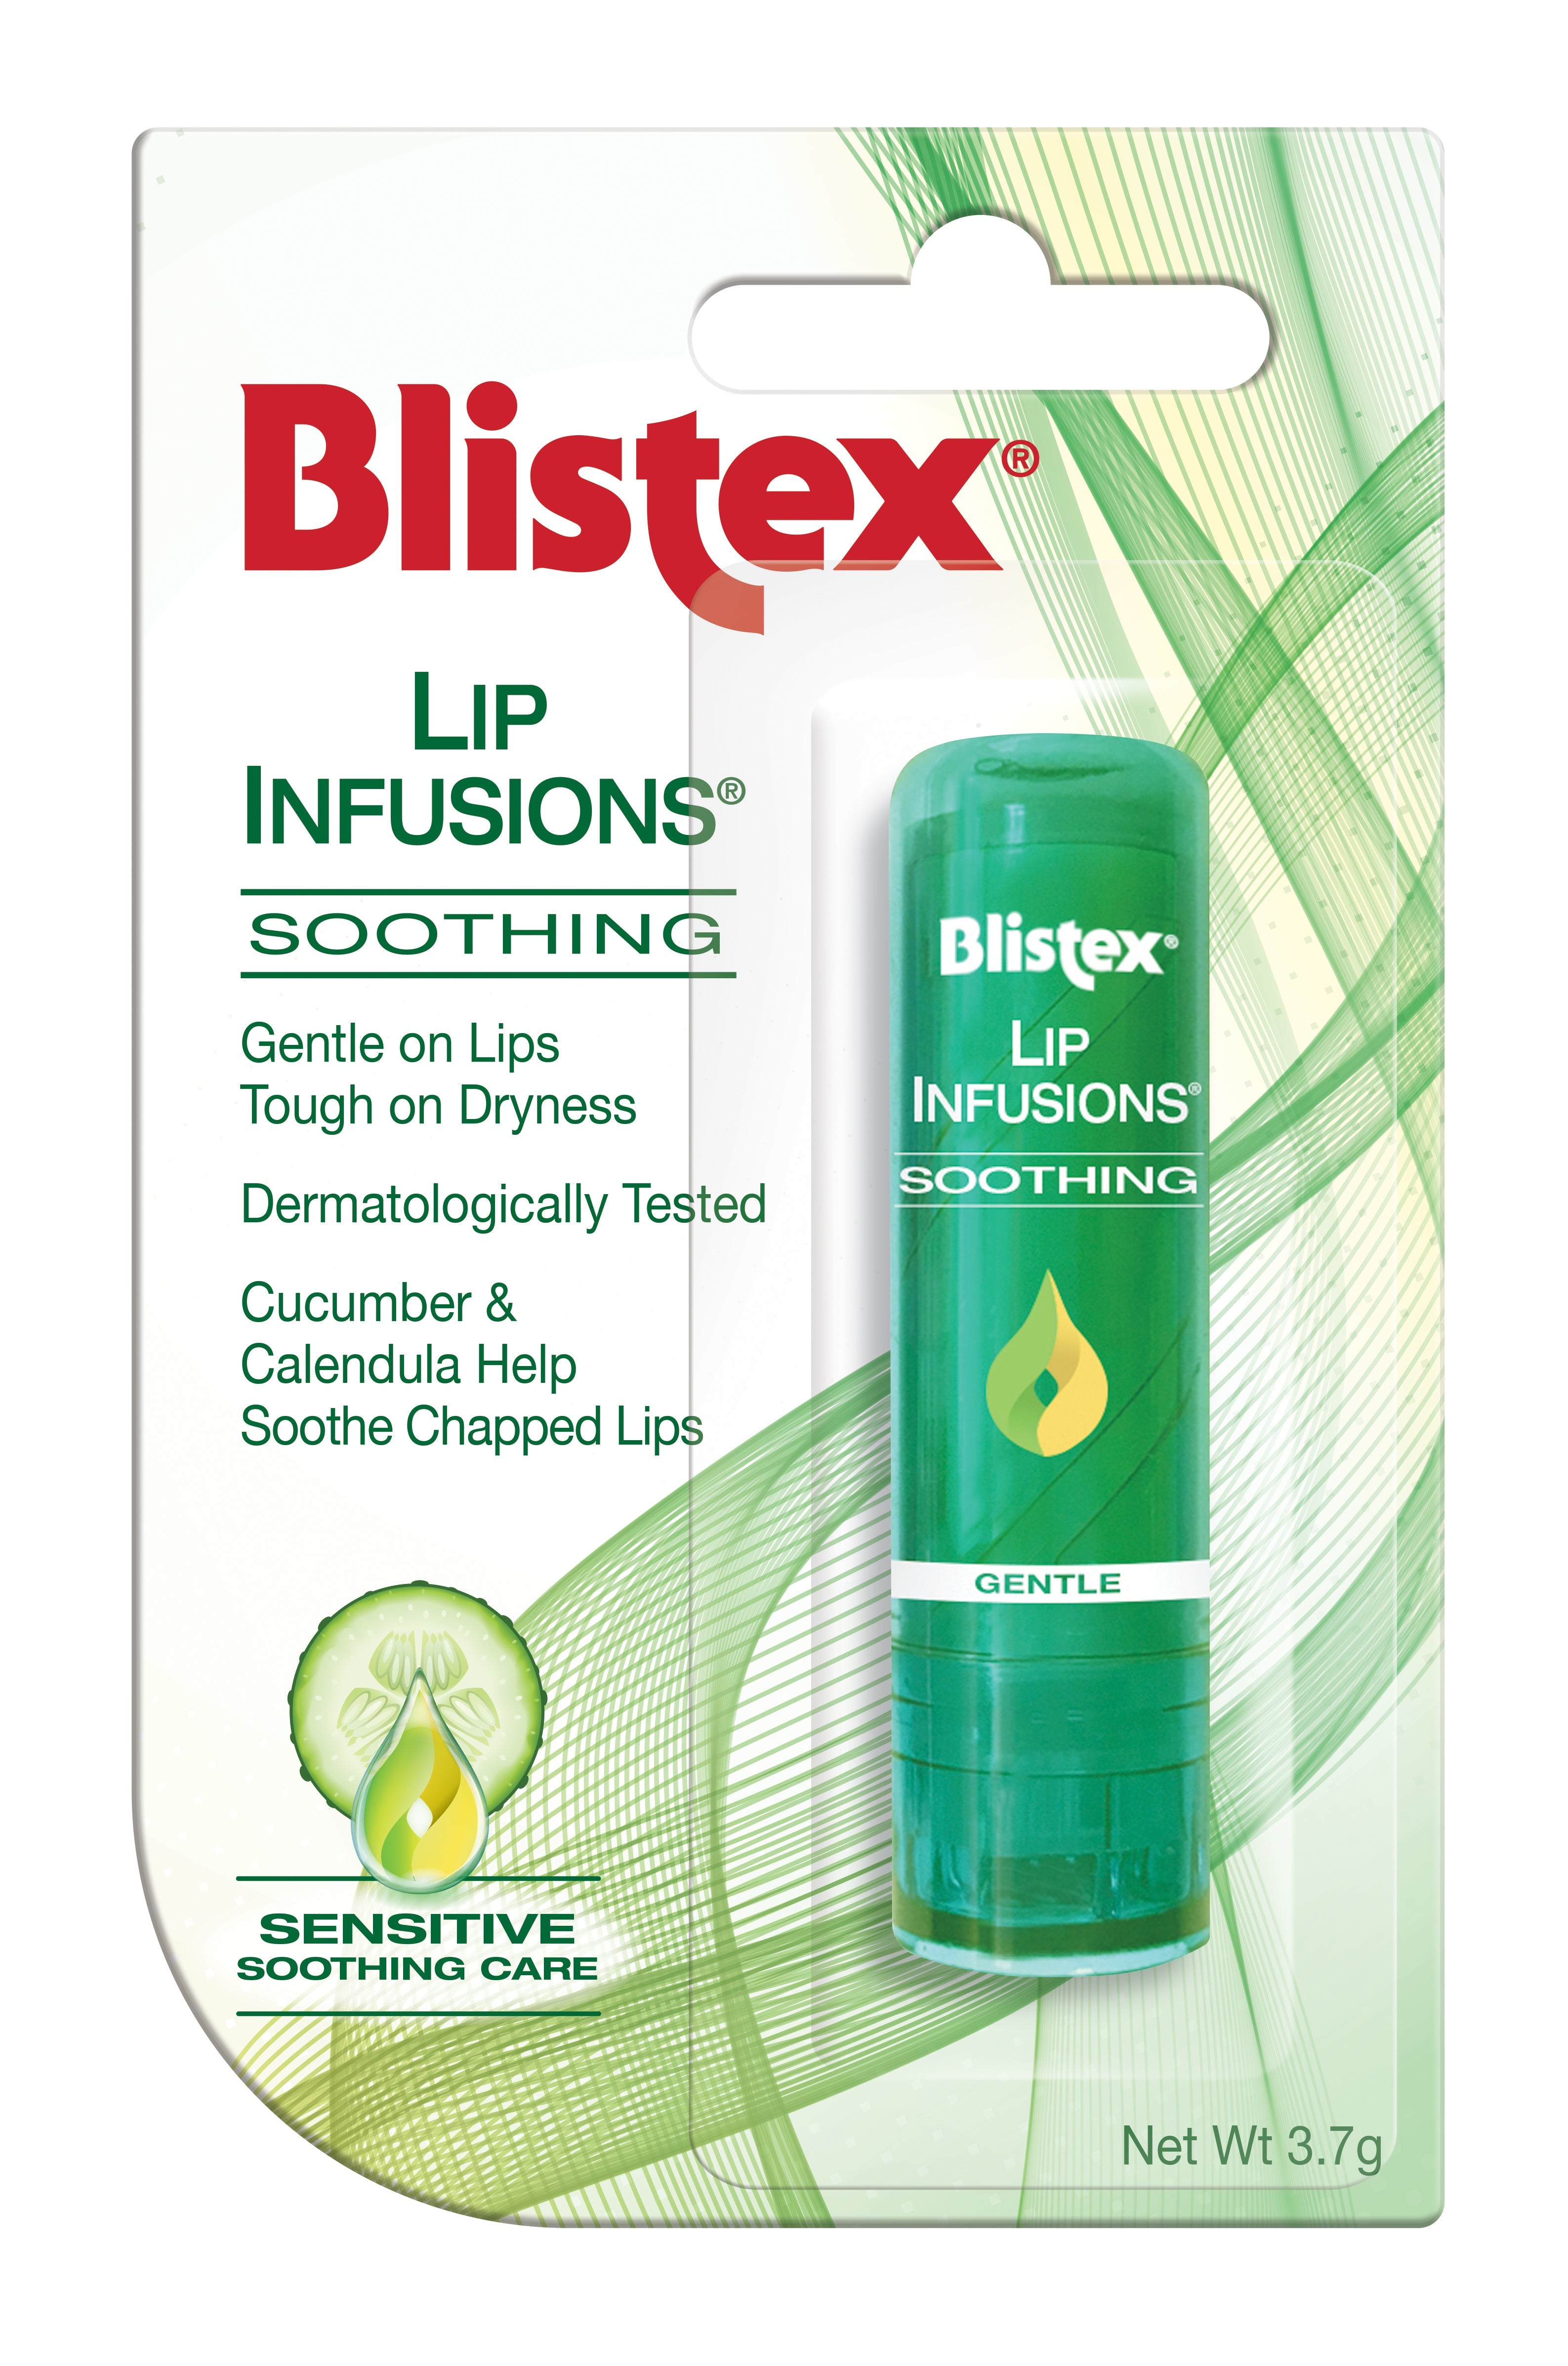 Blistex Lip Infusions Soothing (SPF-free) 3.7g